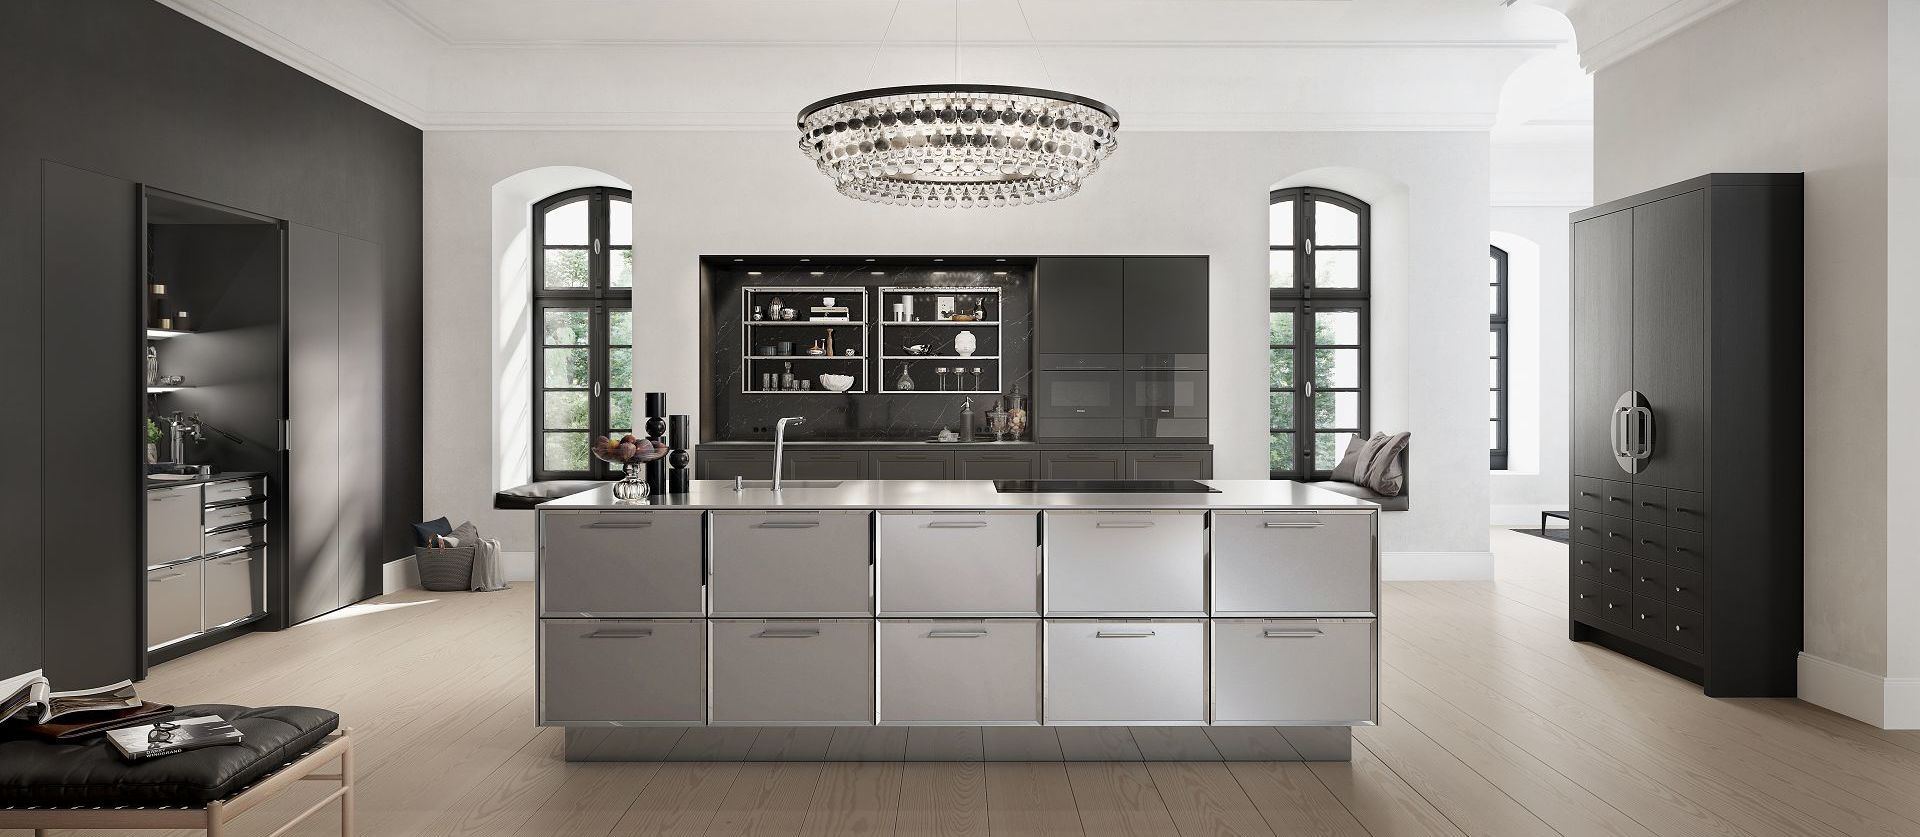 Desirable German kitchens – truly personalised kitchens